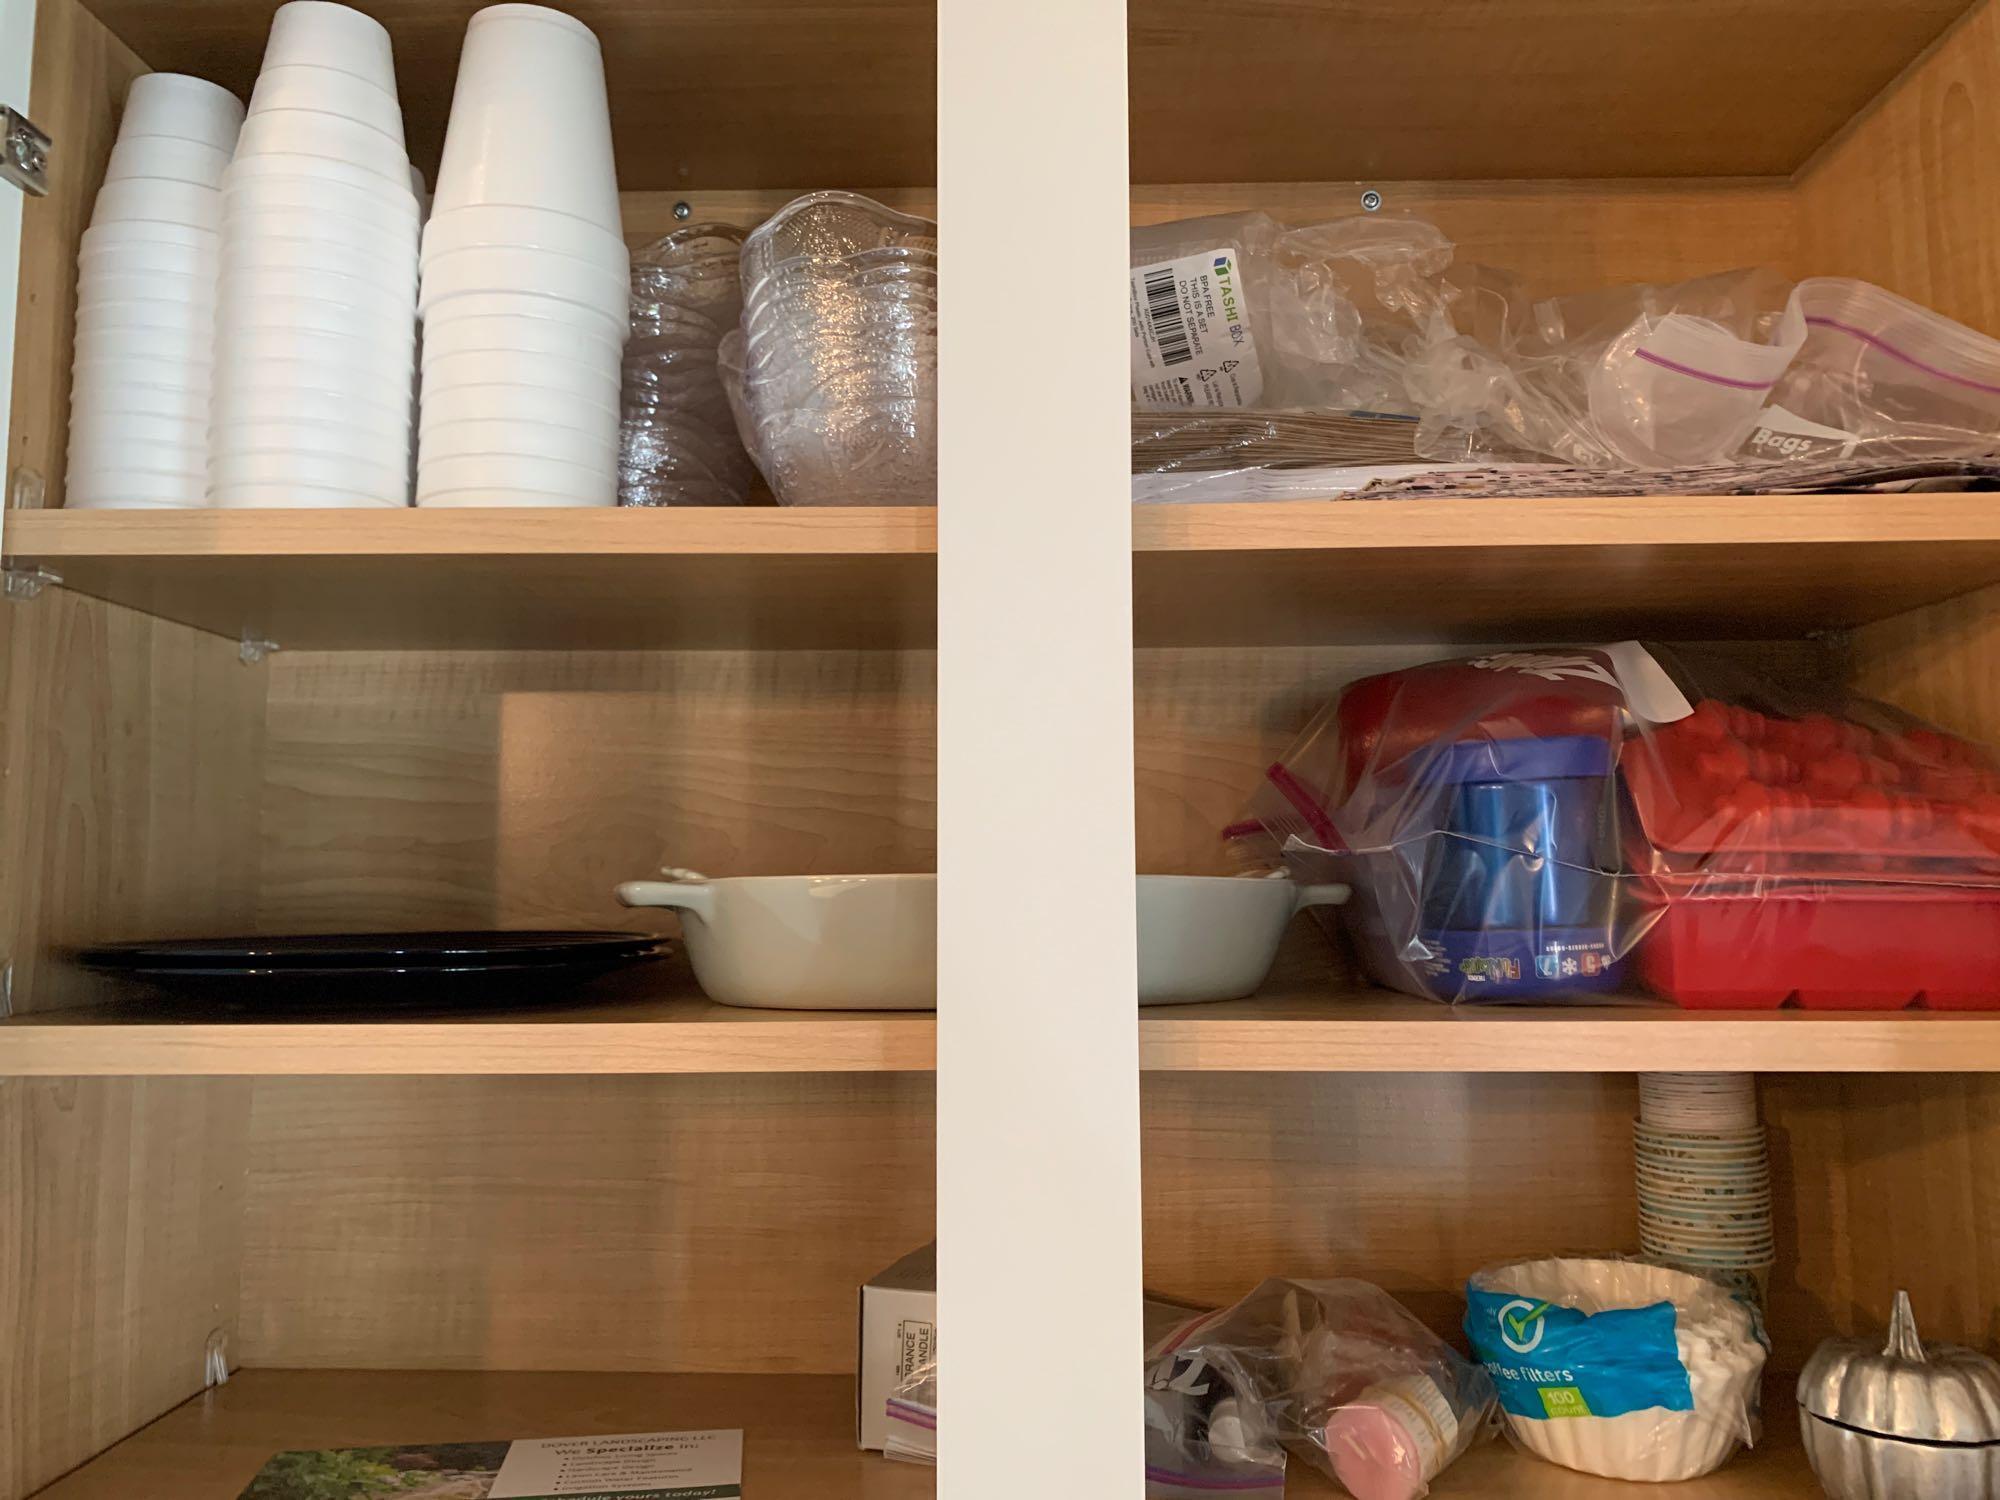 Contents of dining room server, glasses, stemware, Tupperware, baking dishes, and more